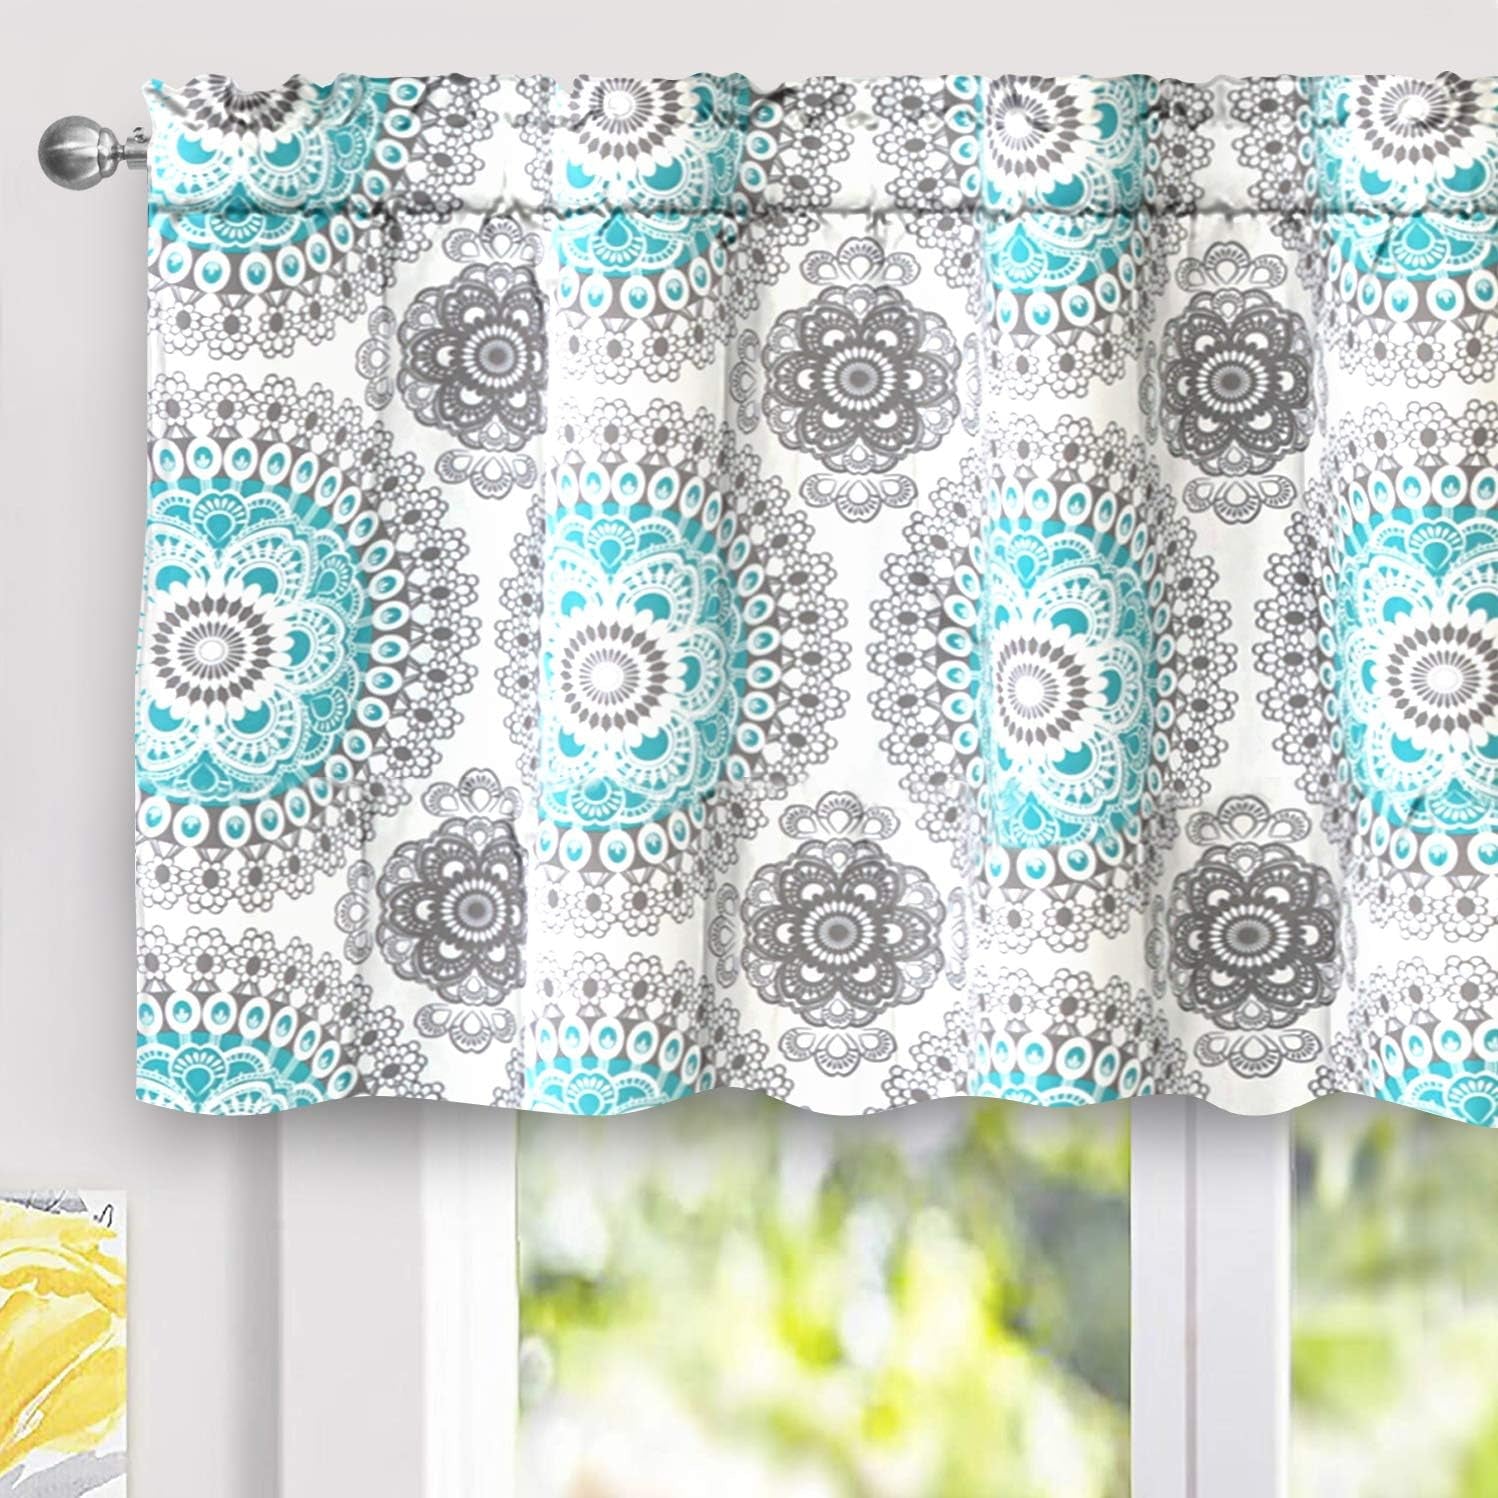 Driftaway Curtains for Bedroom Boho Bella Medallion Pattern Room Darkening Window Curtain Valance Short Curtain for Kitchen Living Room 52 Inch by 18 Inch Aqua and Gray Single